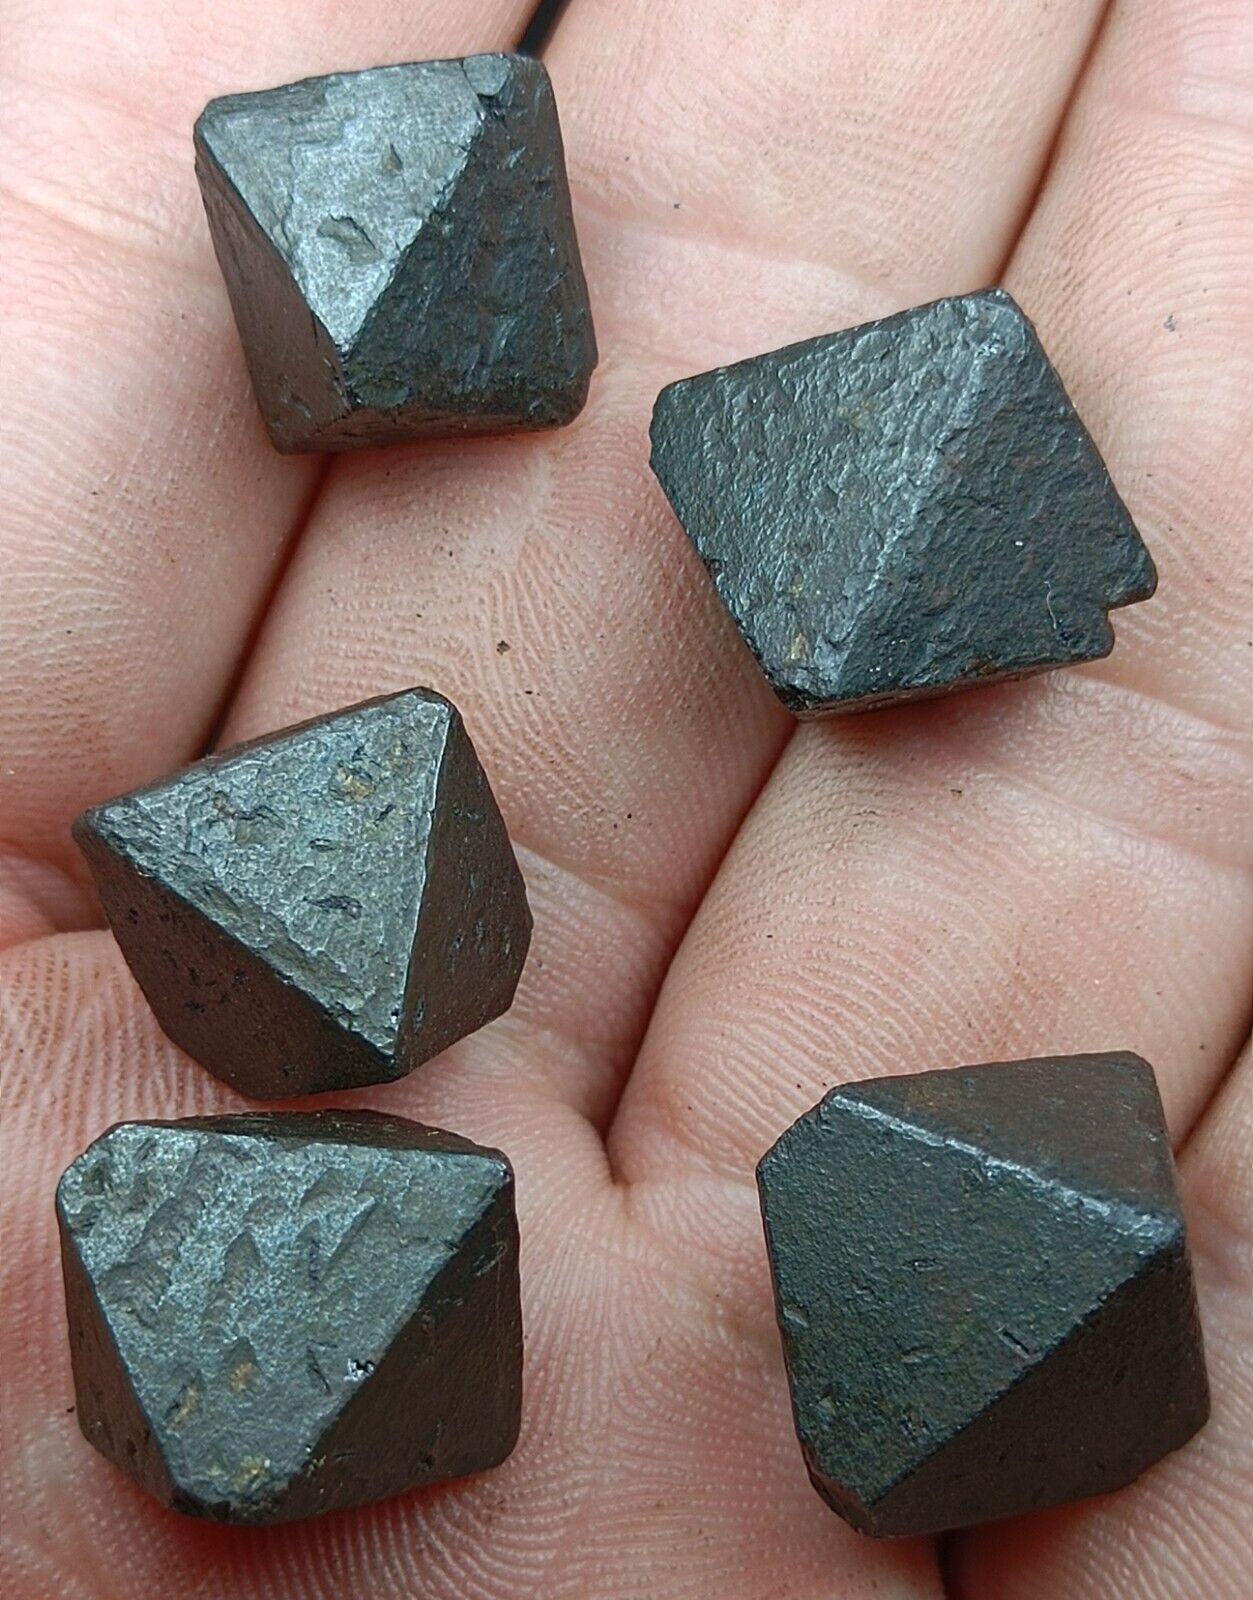 Octahedron Magnetite Crystals with good luster & terminations#5-pcs 